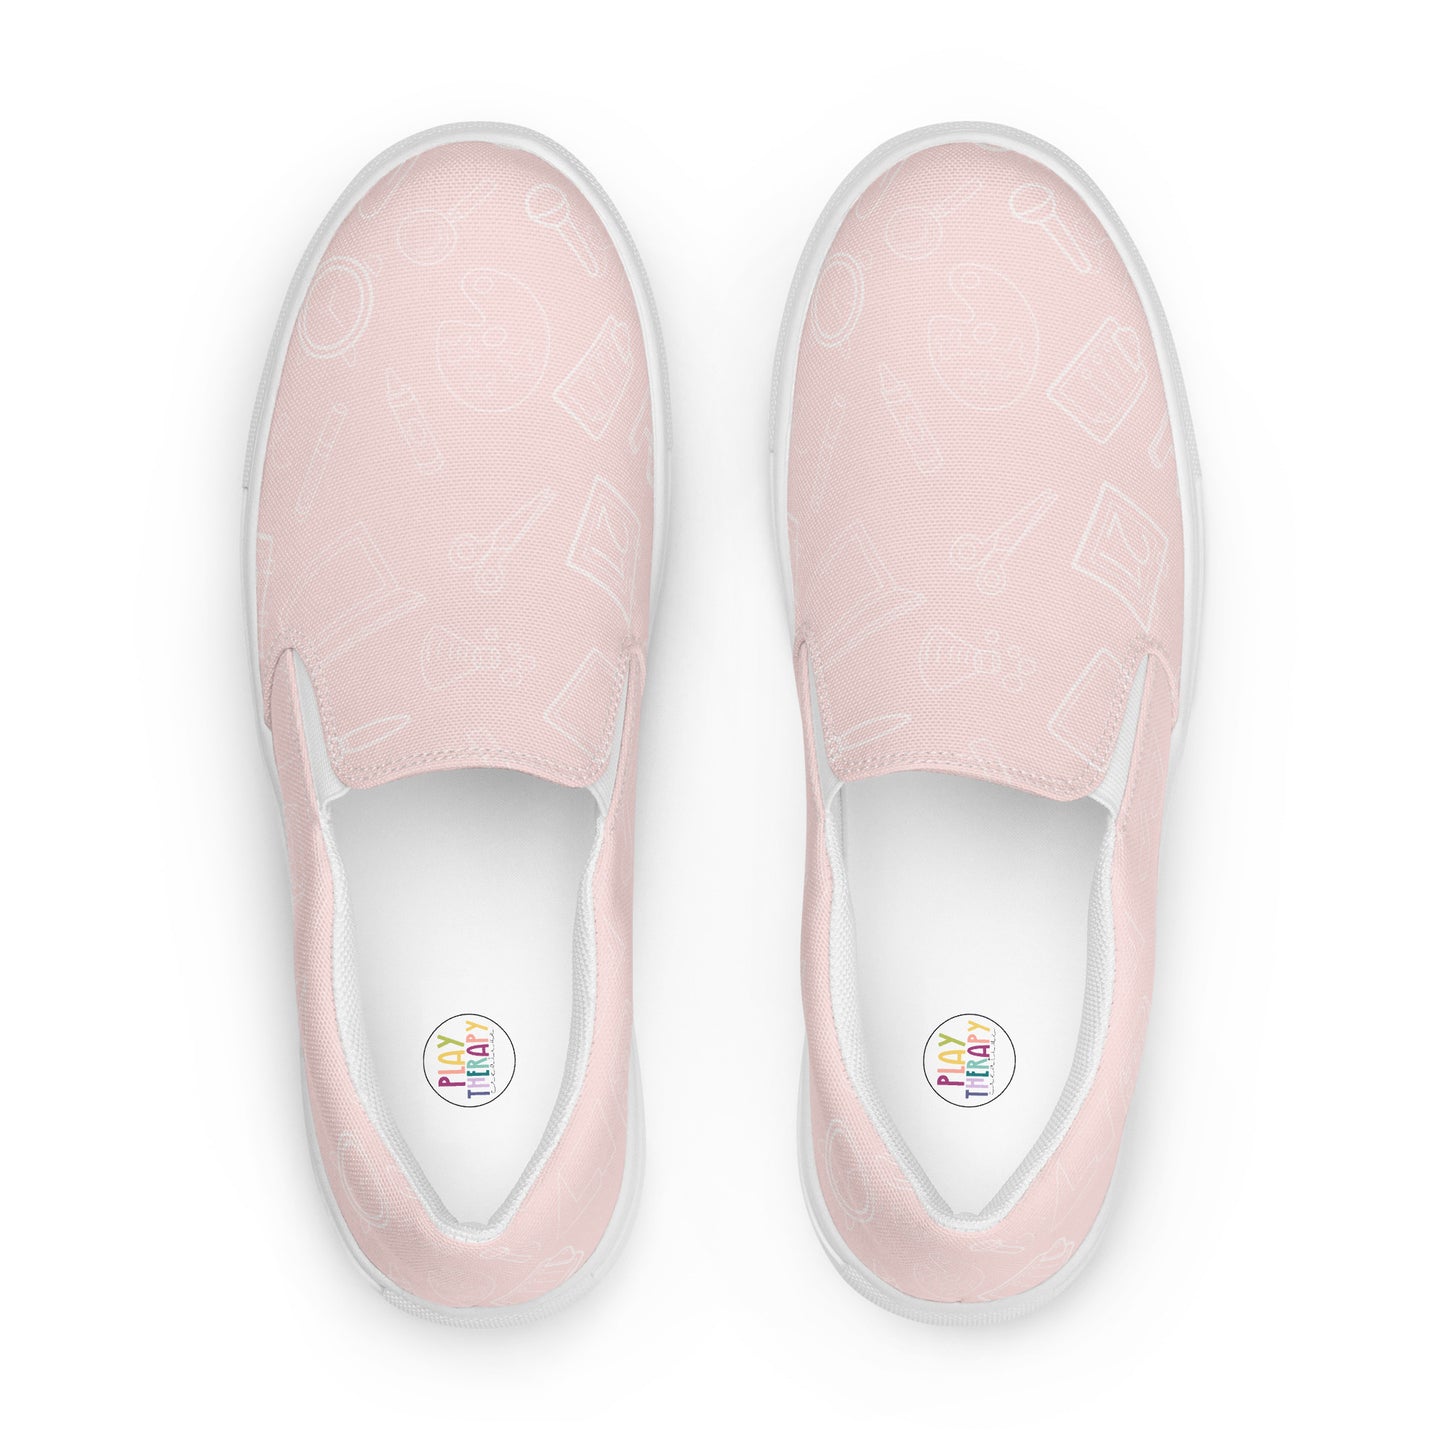 Pink Elementary Doodles Slip-on Canvas Shoes (Women's Sizes)